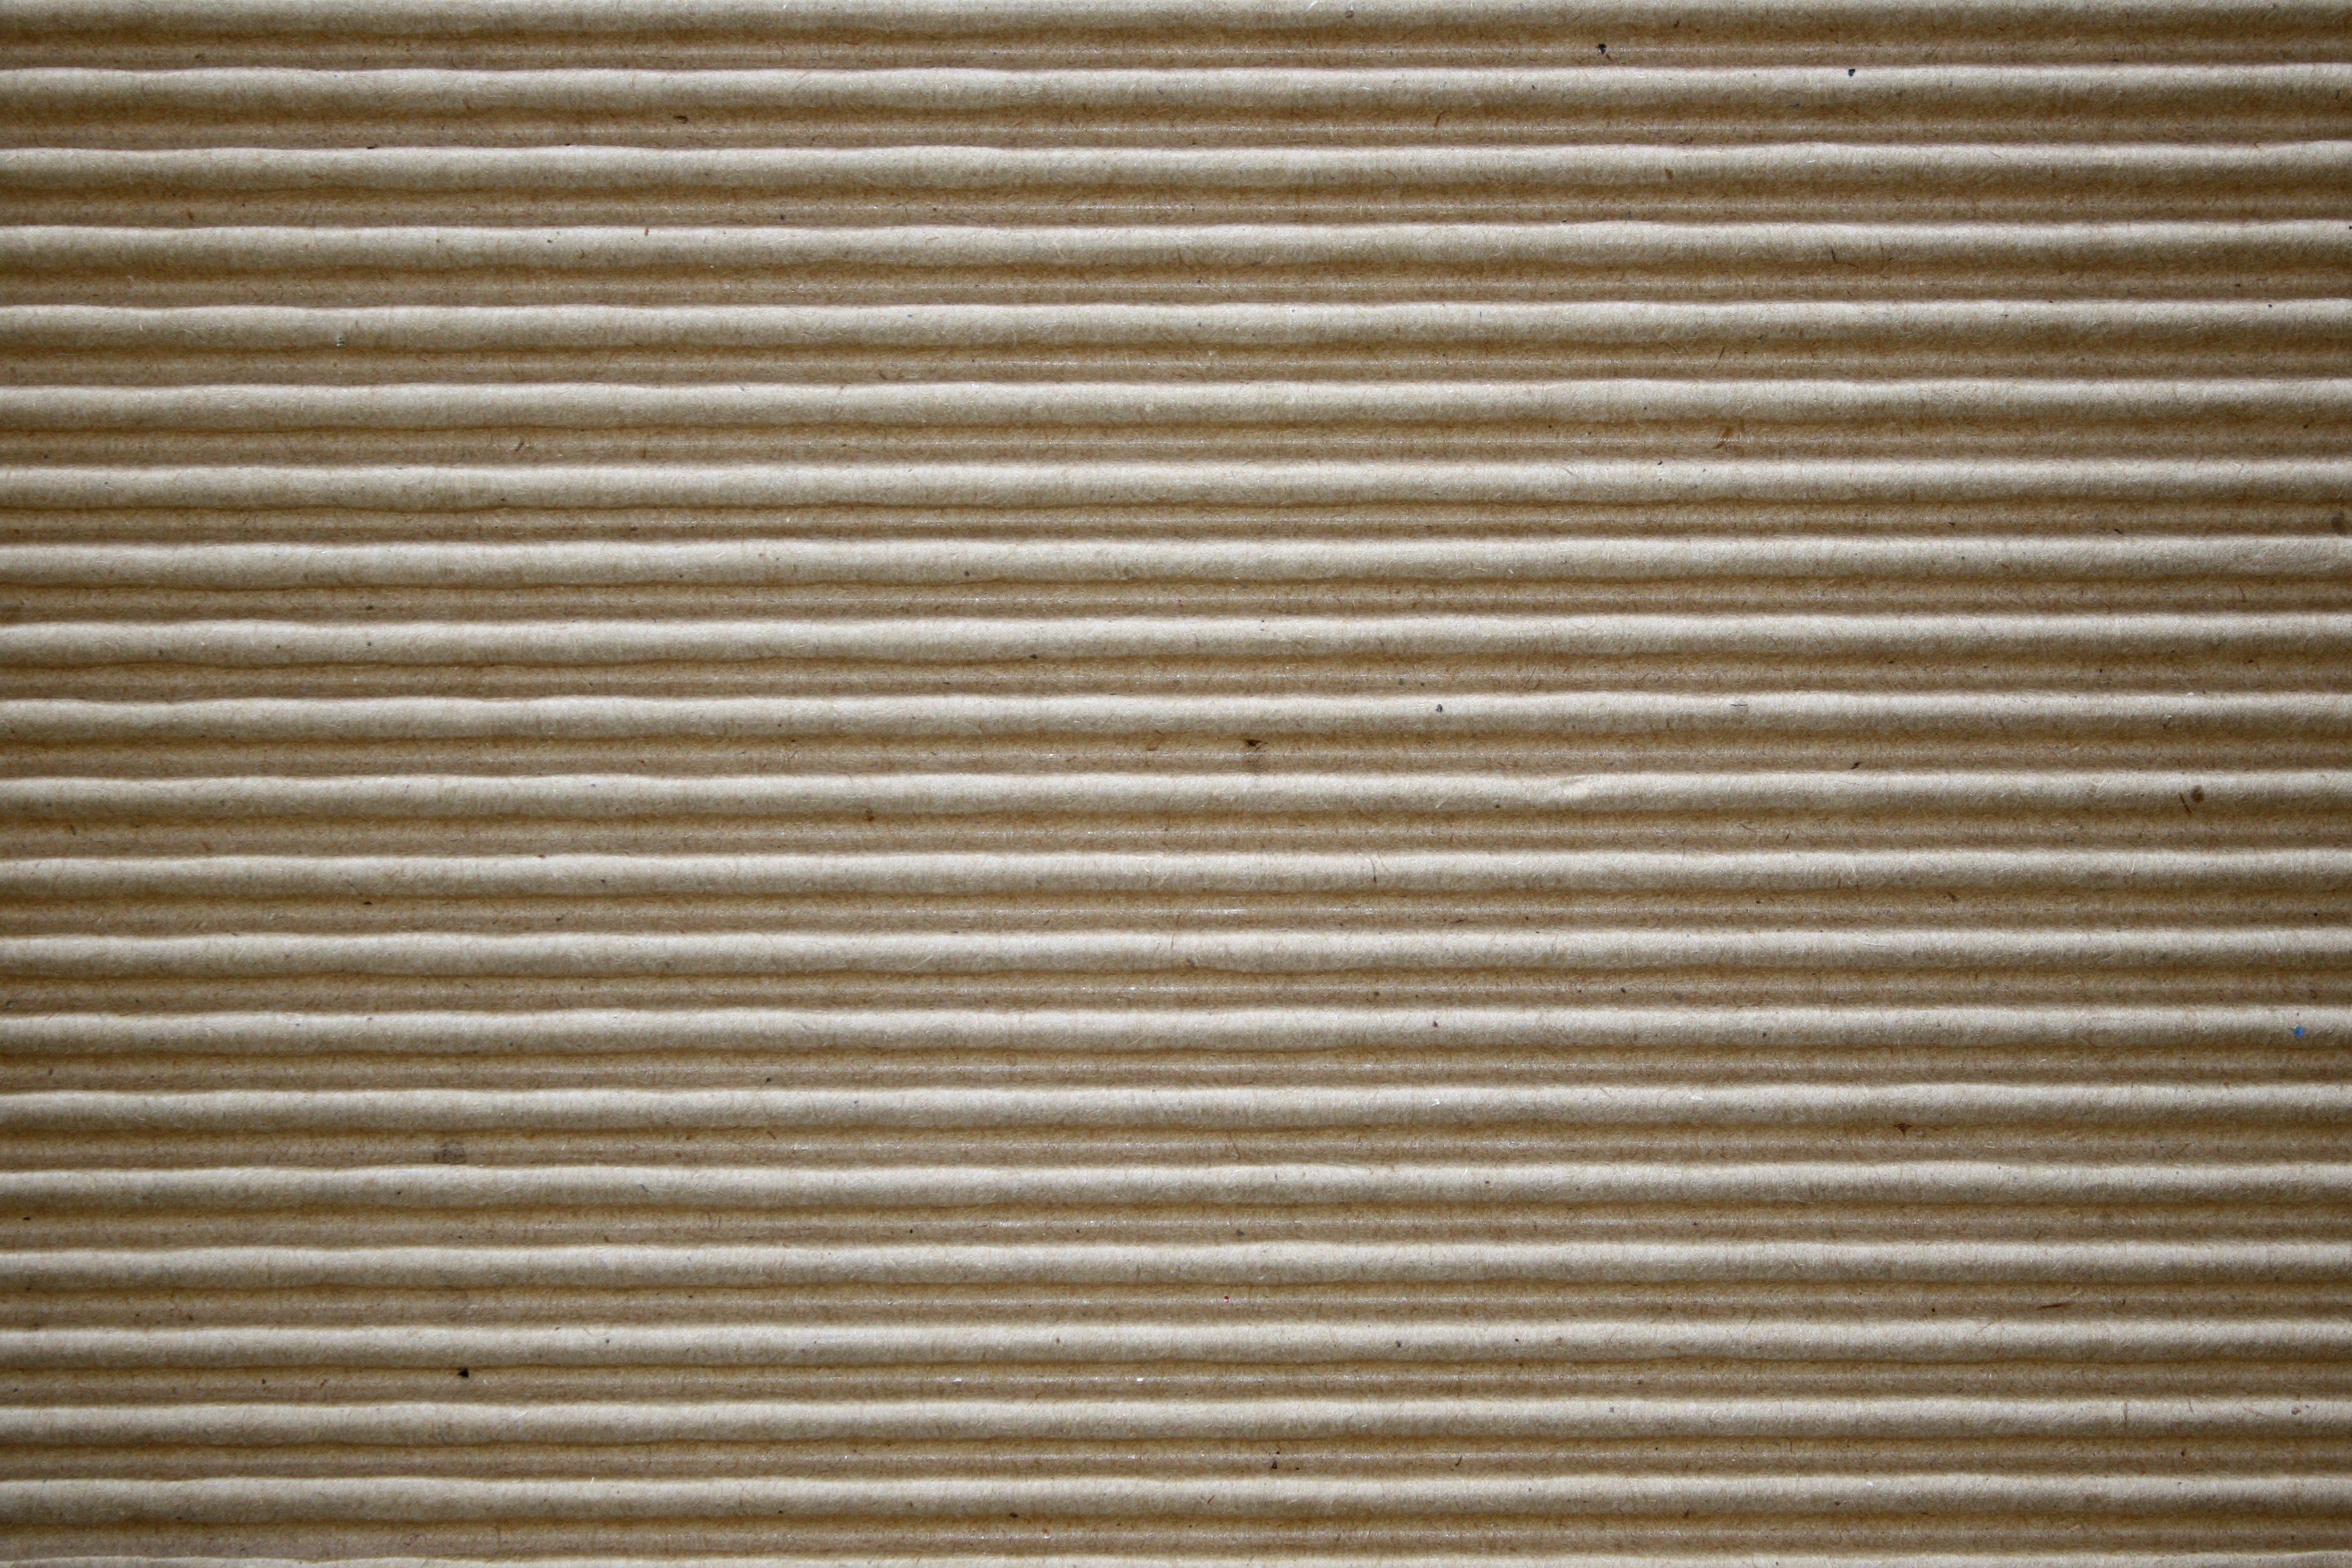 Corrugated Cardboard Texture Picture | Free Photograph | Photos ...